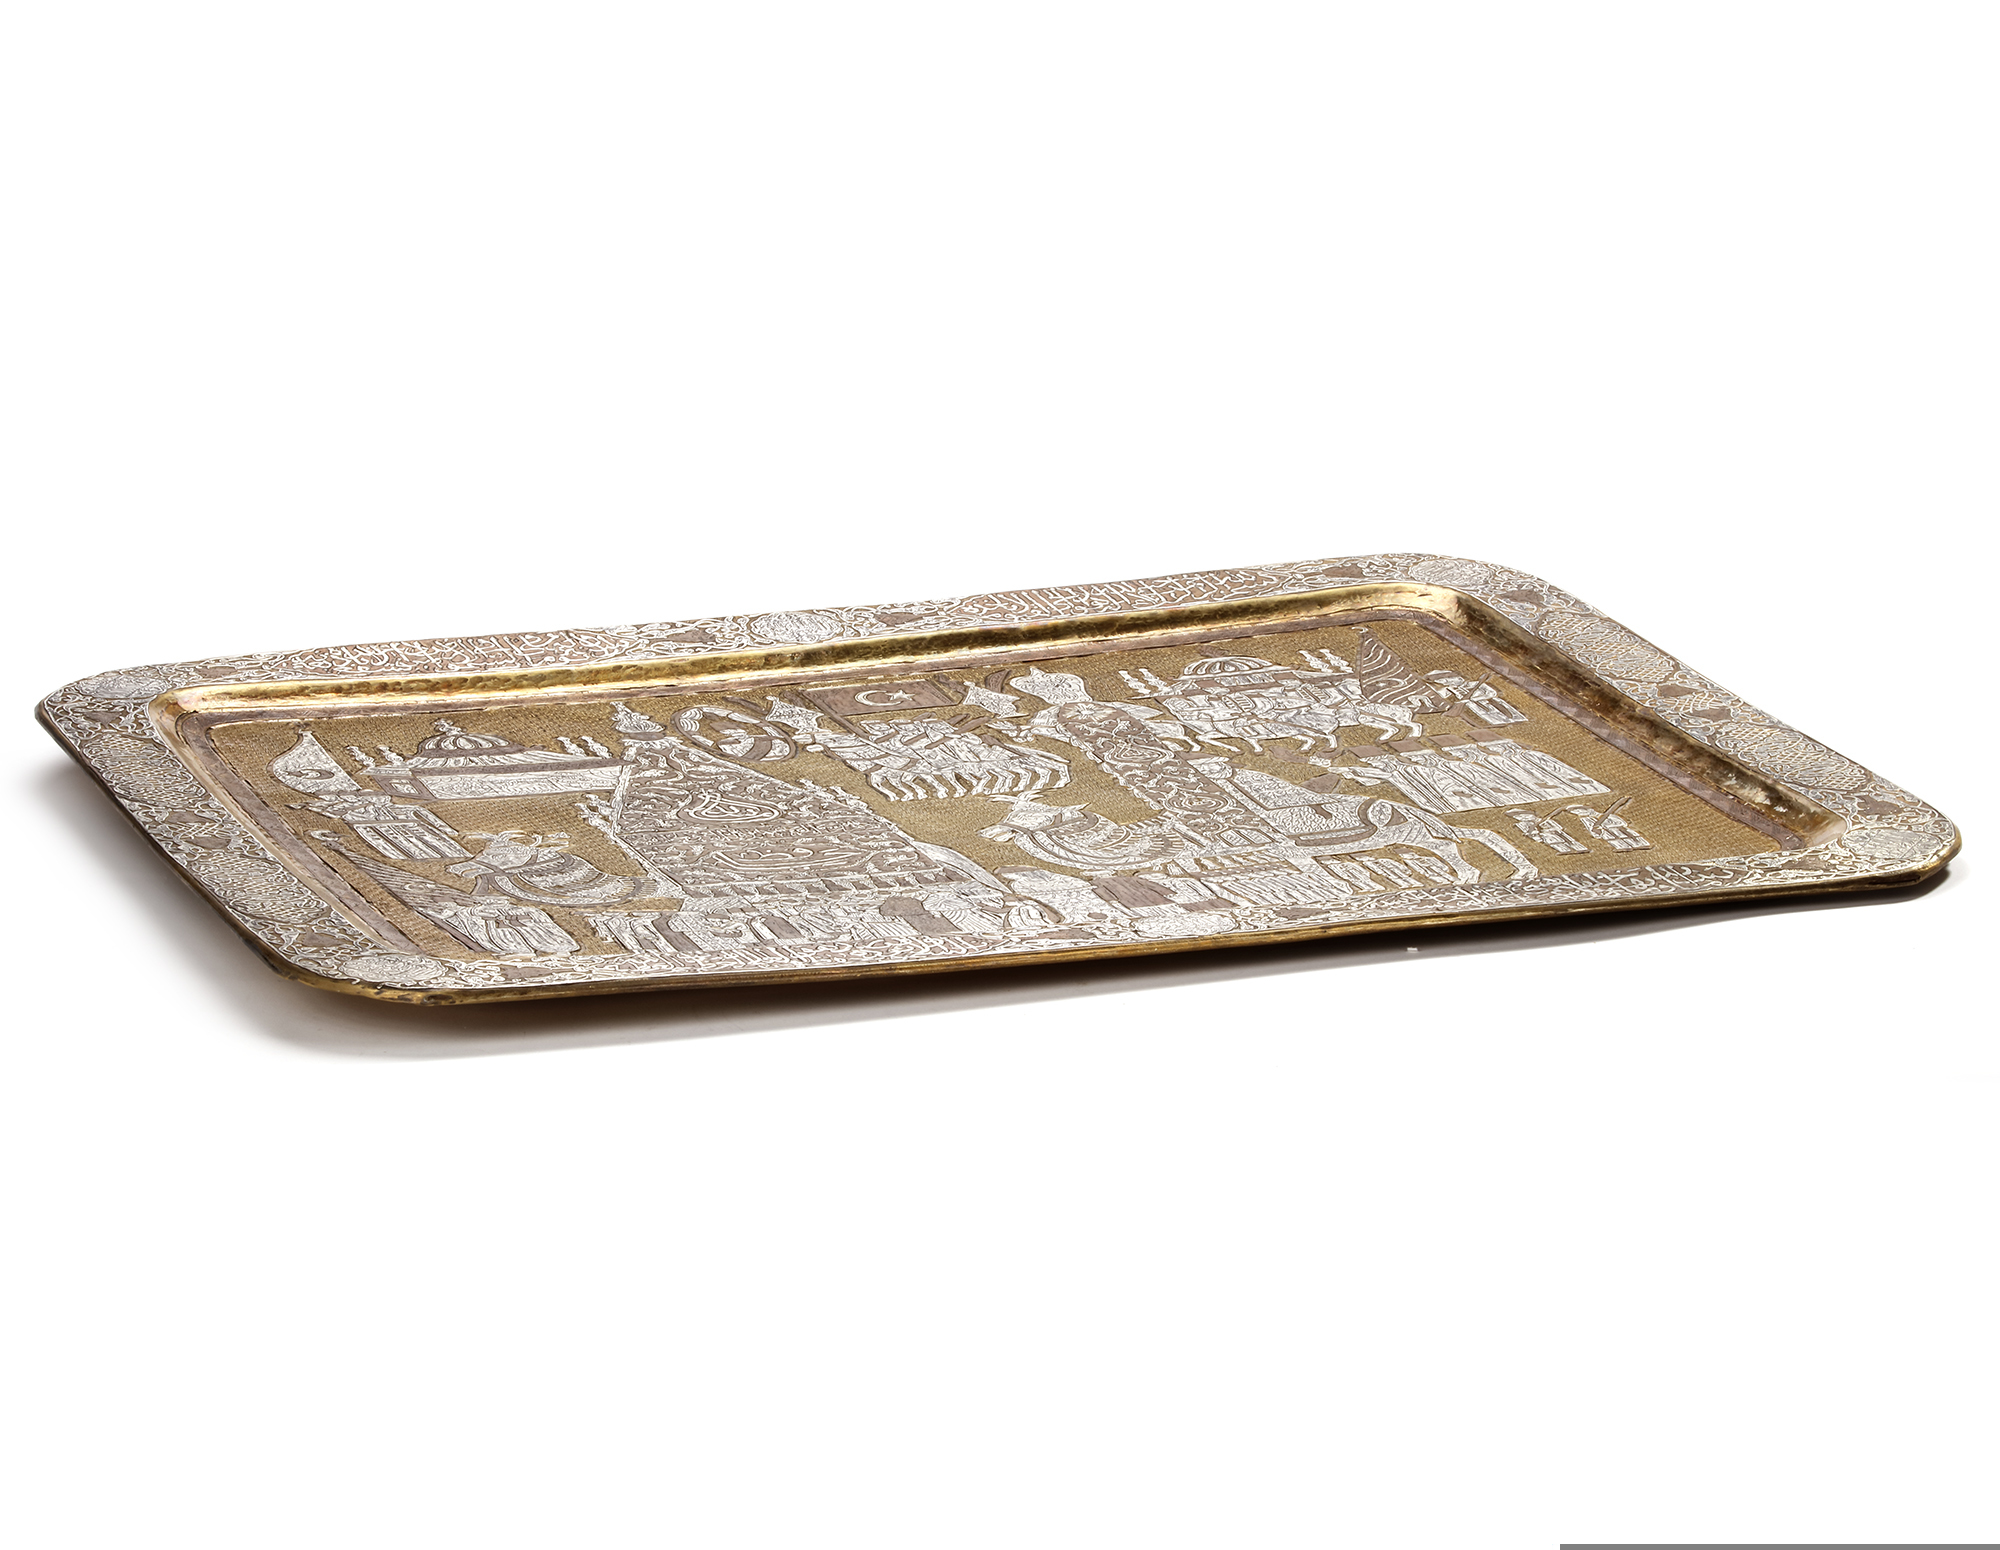 File:Brass tray inlaid with silver, Egypt or Syria, 19th century